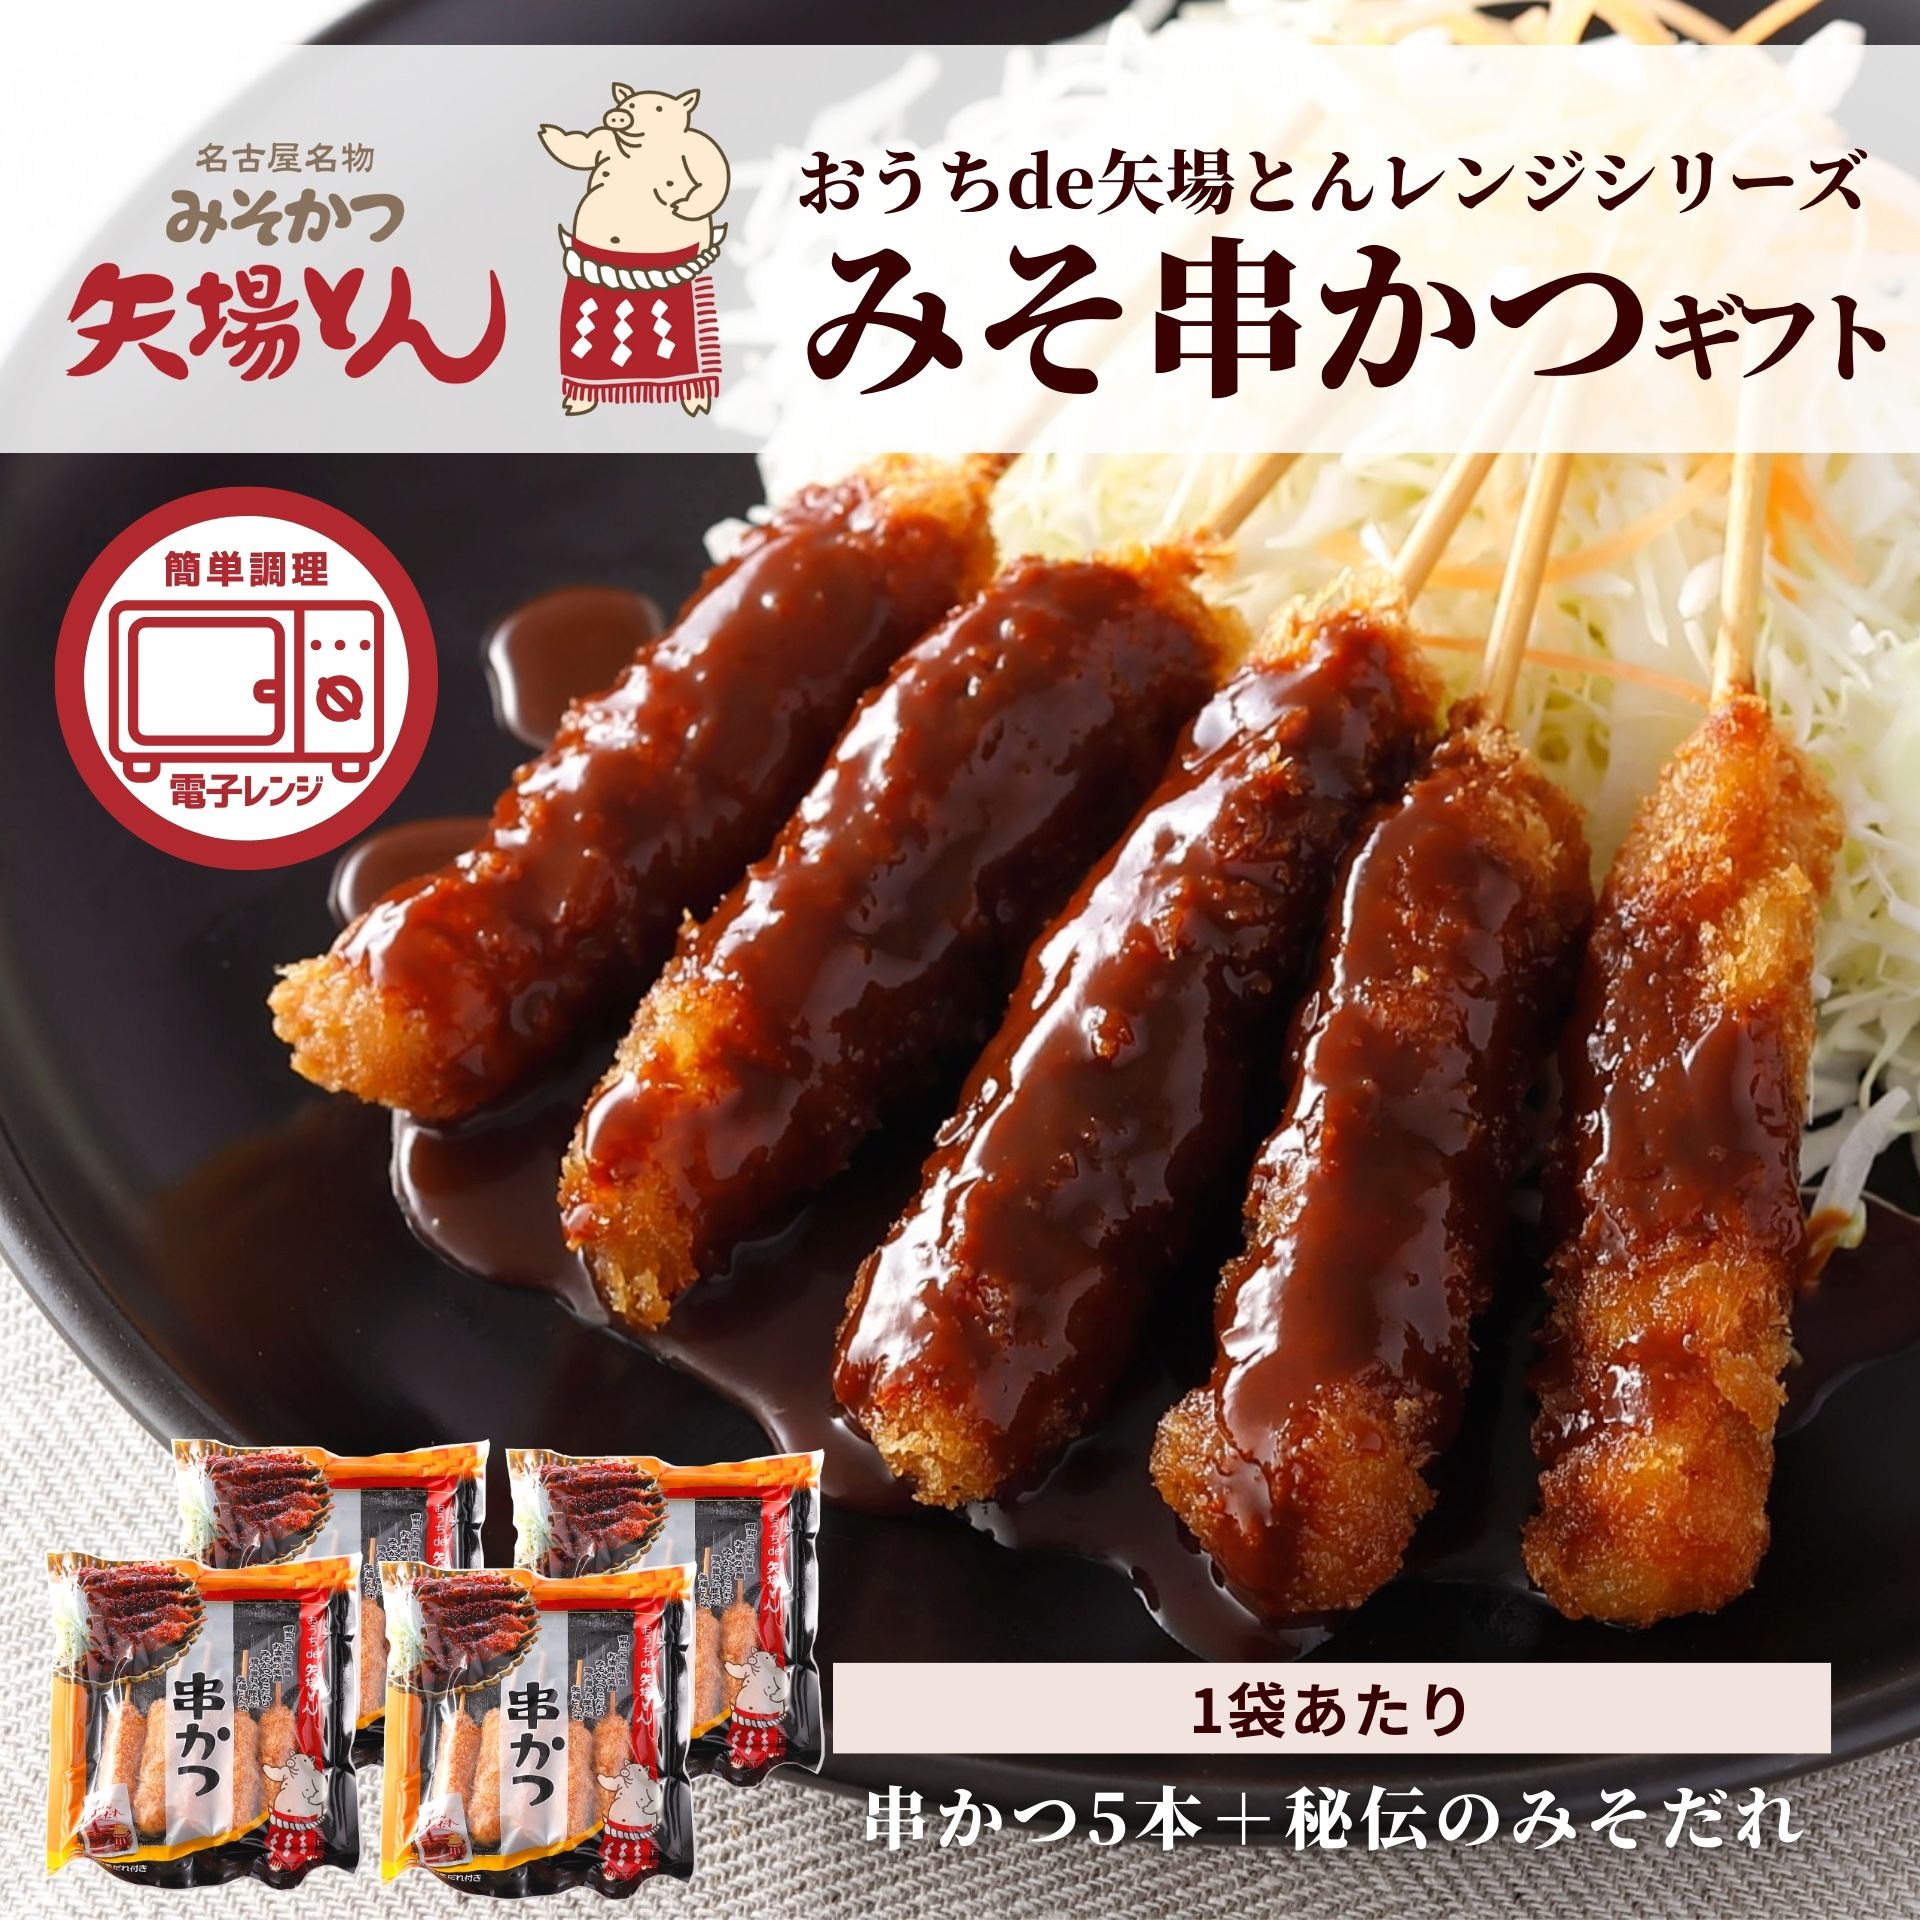  gift Nagoya special product arrow place .. miso . and 20 pcs set frozen food domestic production pork .katsu miso and microwave oven ... year-end gift. . present small amount . Mother's Day Father's day 